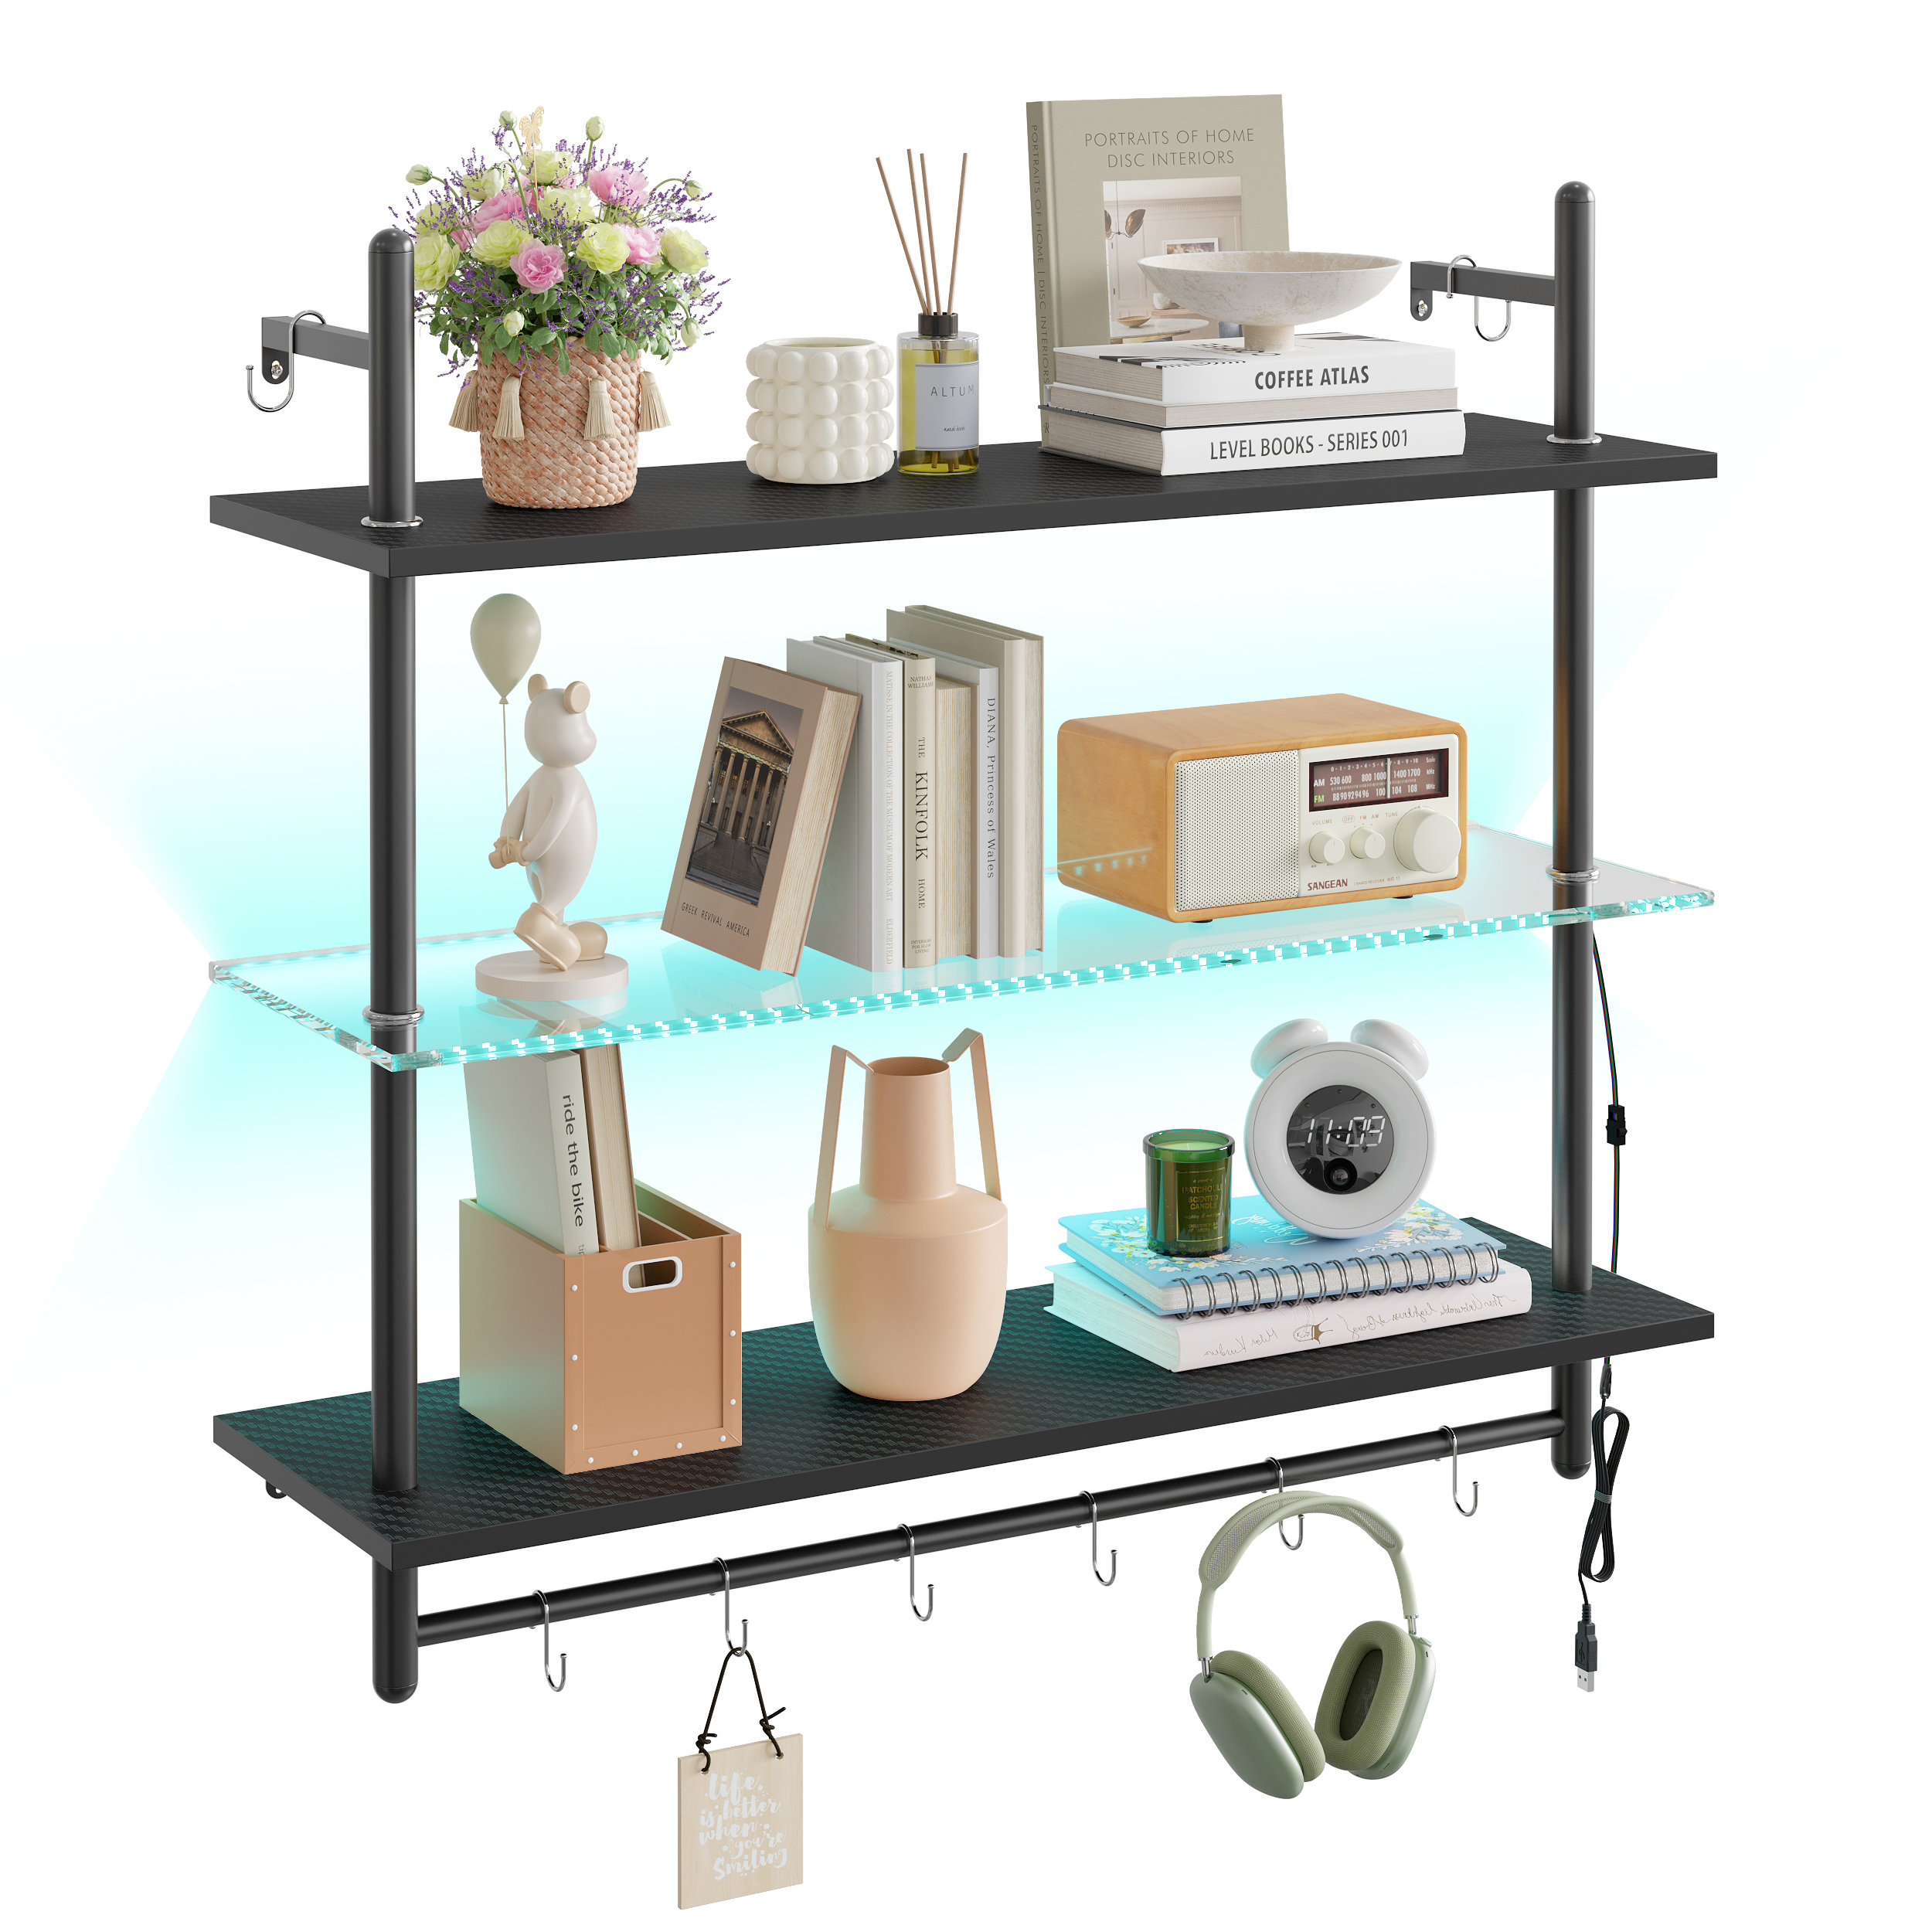 Bestier 41" Floating Shelves for Wall with LED Light 3-Tier Wall-Mounted Wood Shelves, Black Carbon Fiber - image 5 of 9